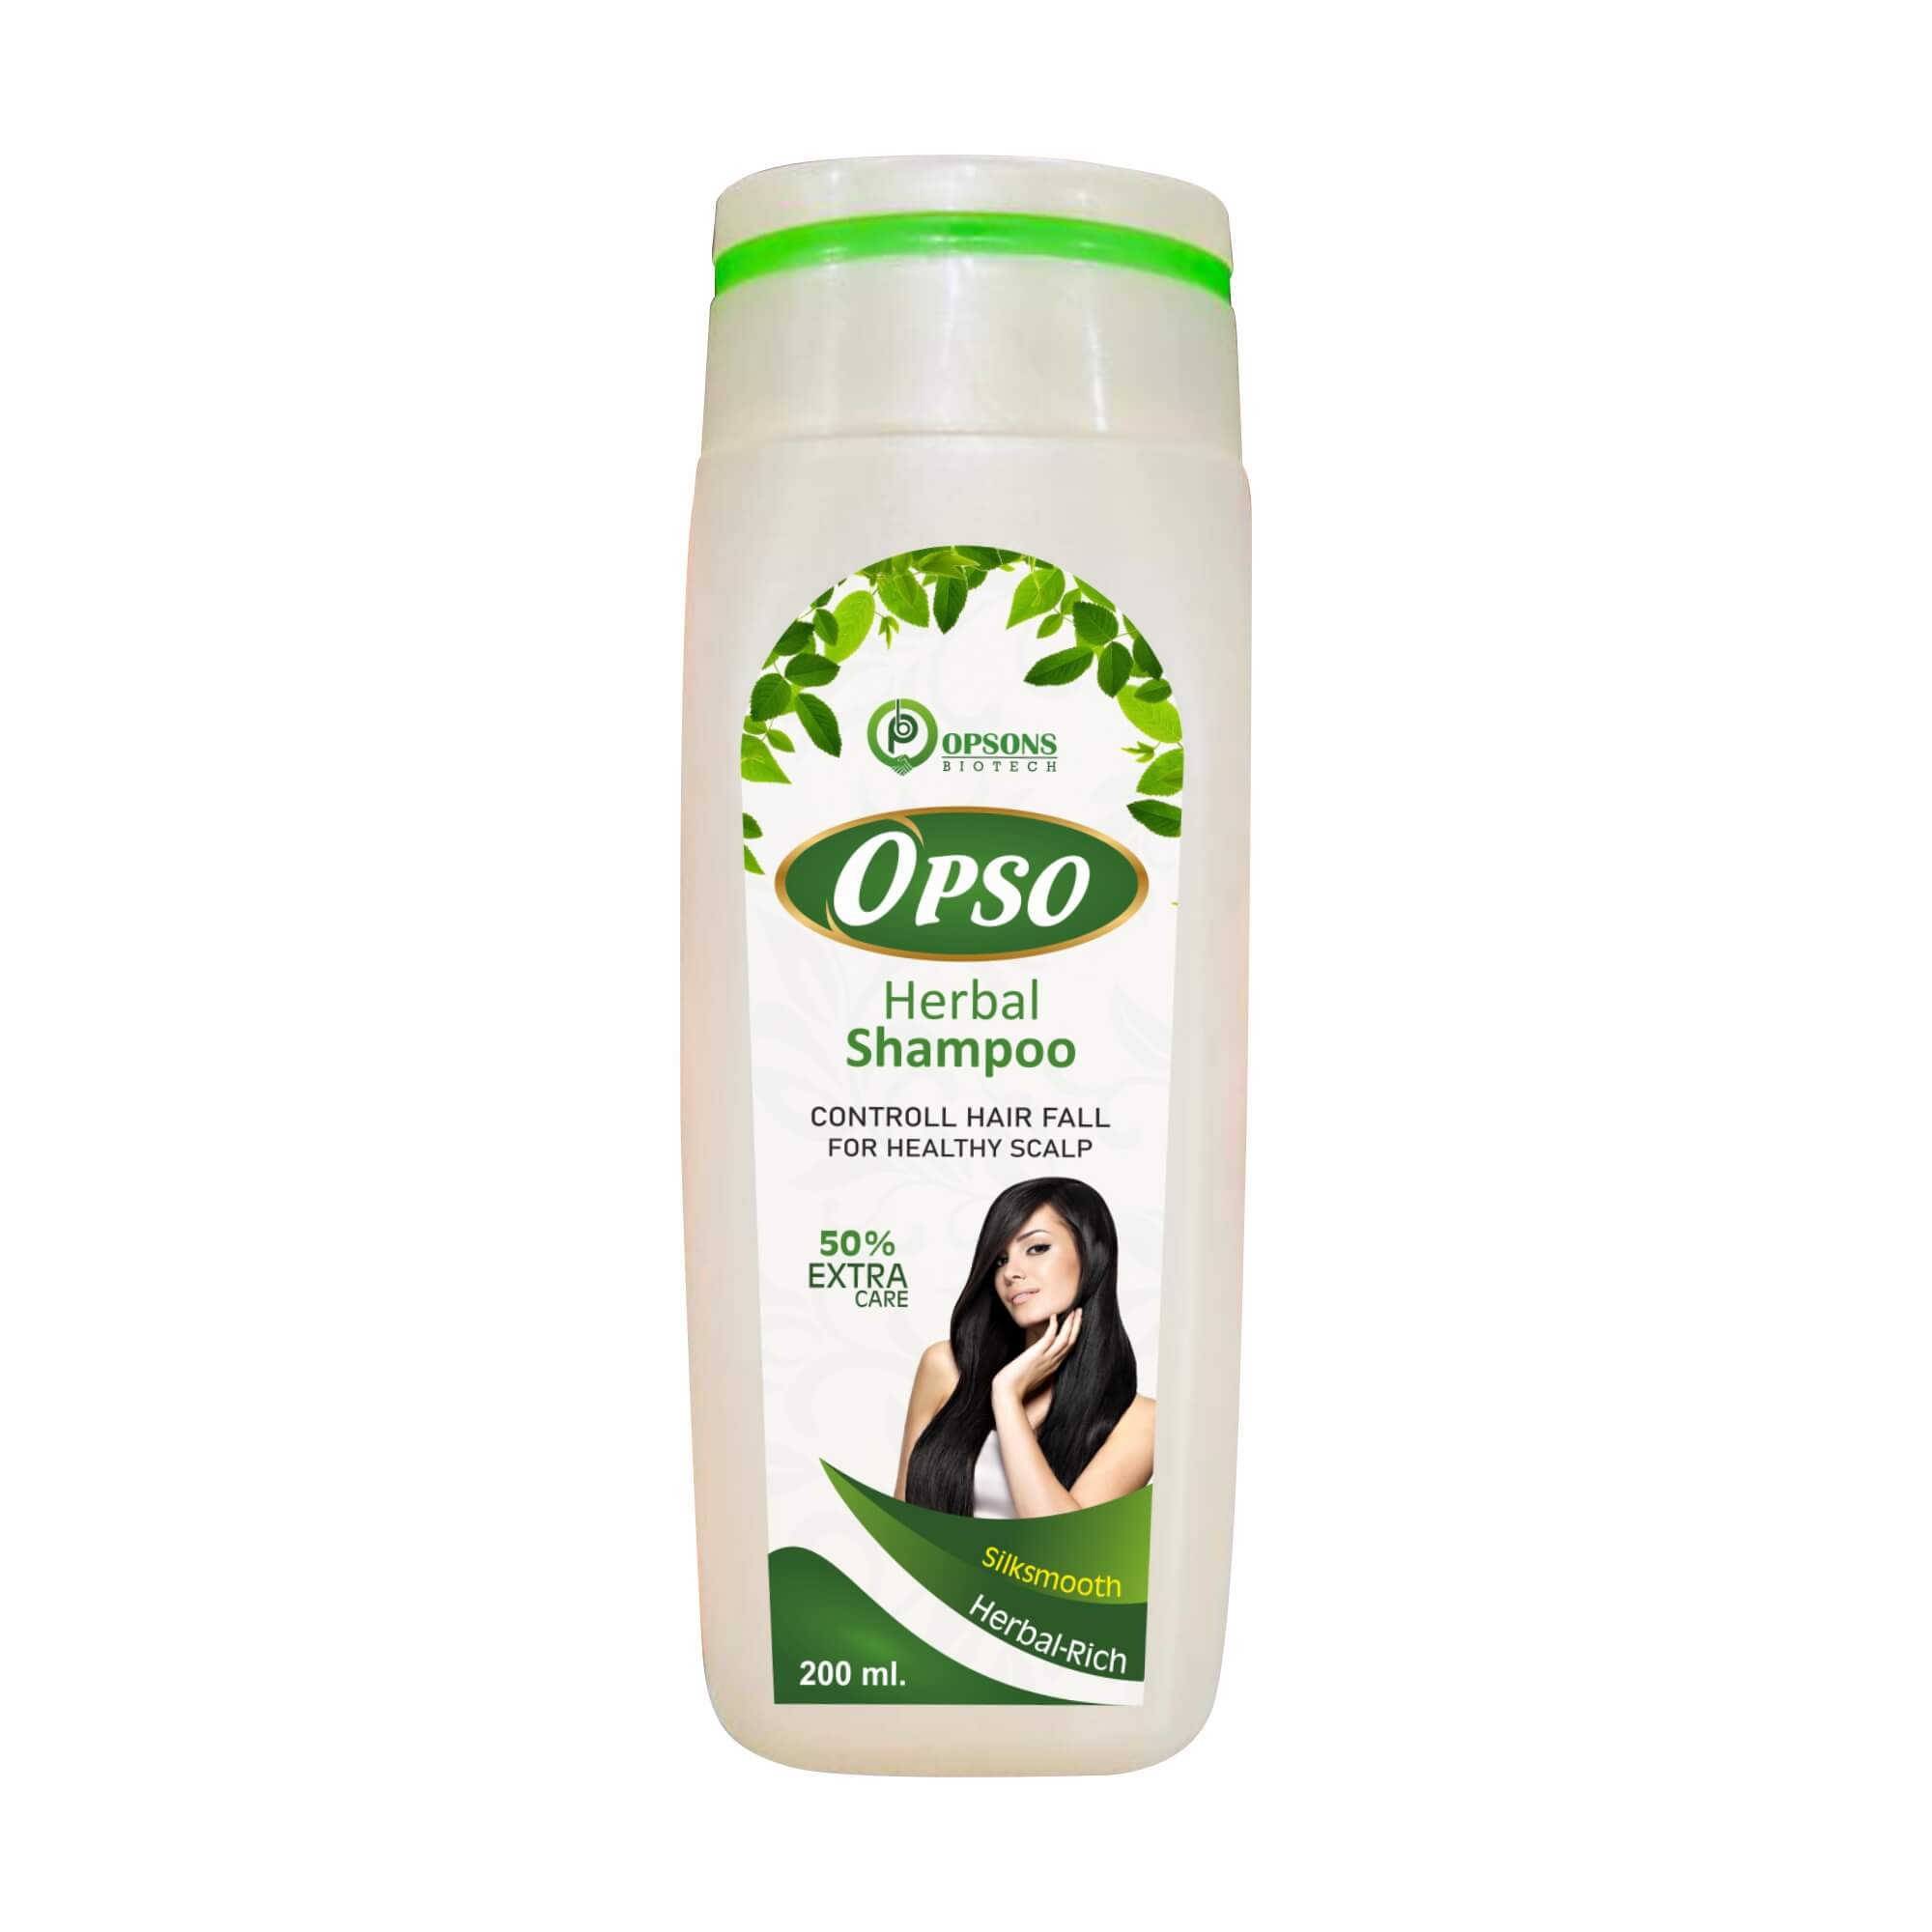 Product Name: Opso Shampoo, Compositions of Opso Shampoo are Control Hair fall For Healthy Scalp - Opsons Biotech